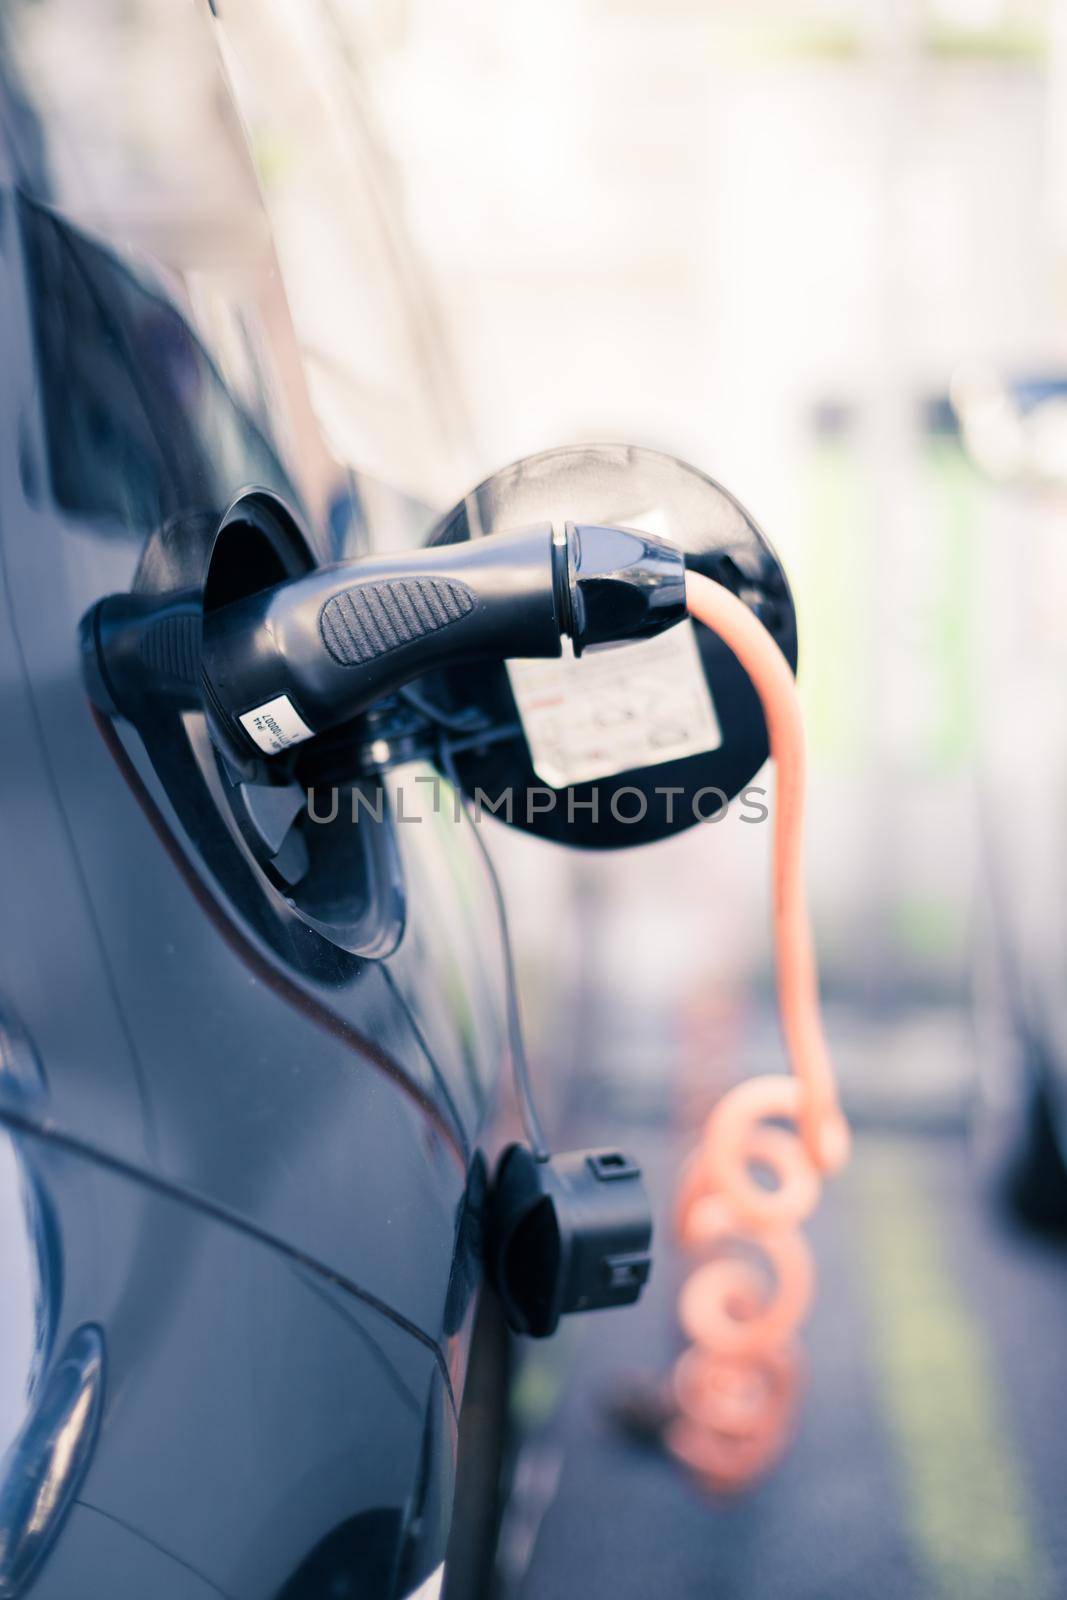 Charching an electric car with power cable supply, plugged in by Daxenbichler